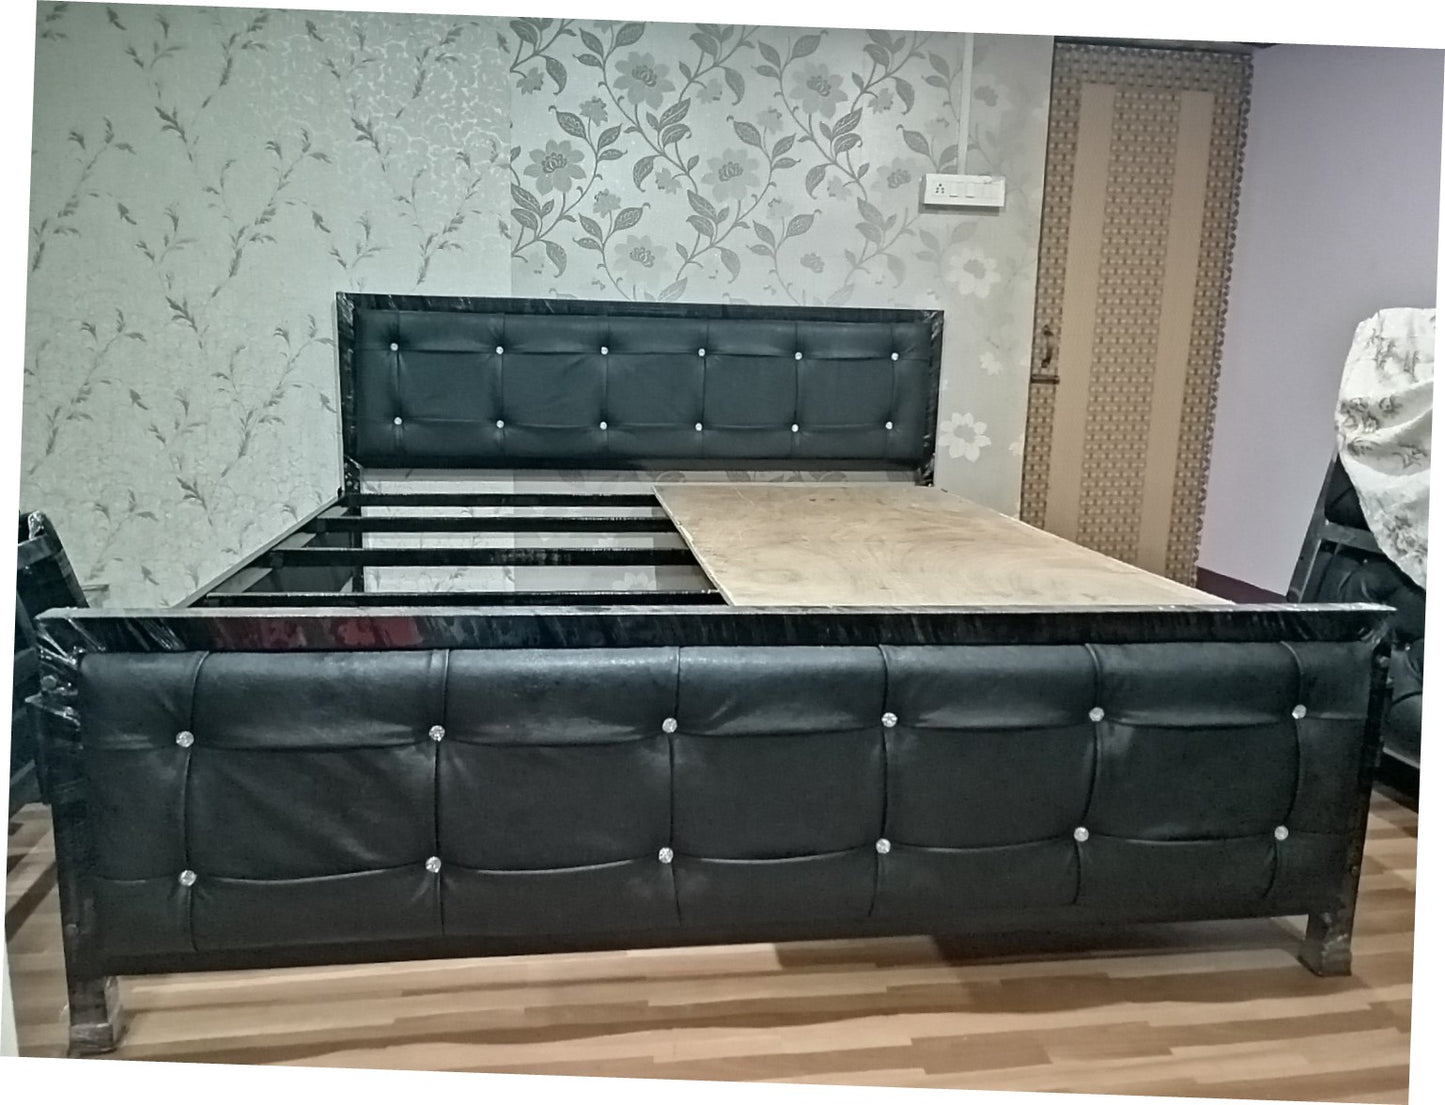 Bowzar KCUP Queen Size 5X6.5 Feet Heavy Quality Upholstered Metal Iron Bed Black